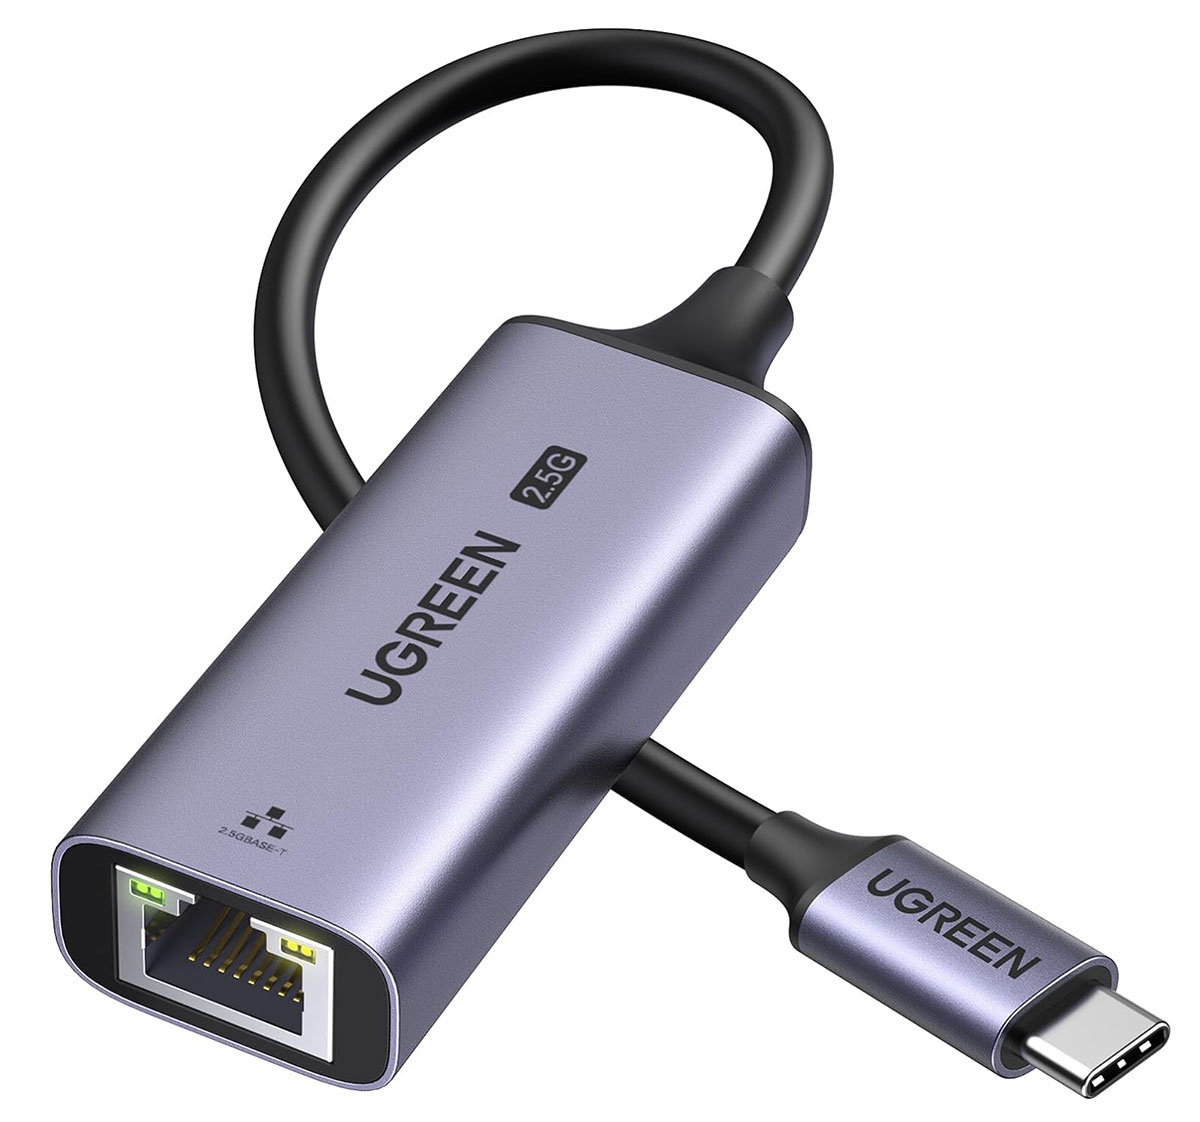 Ugreen USB-C to Ethernet Adapter 2.5G - Best simple adapter for 2.5G Ethernet